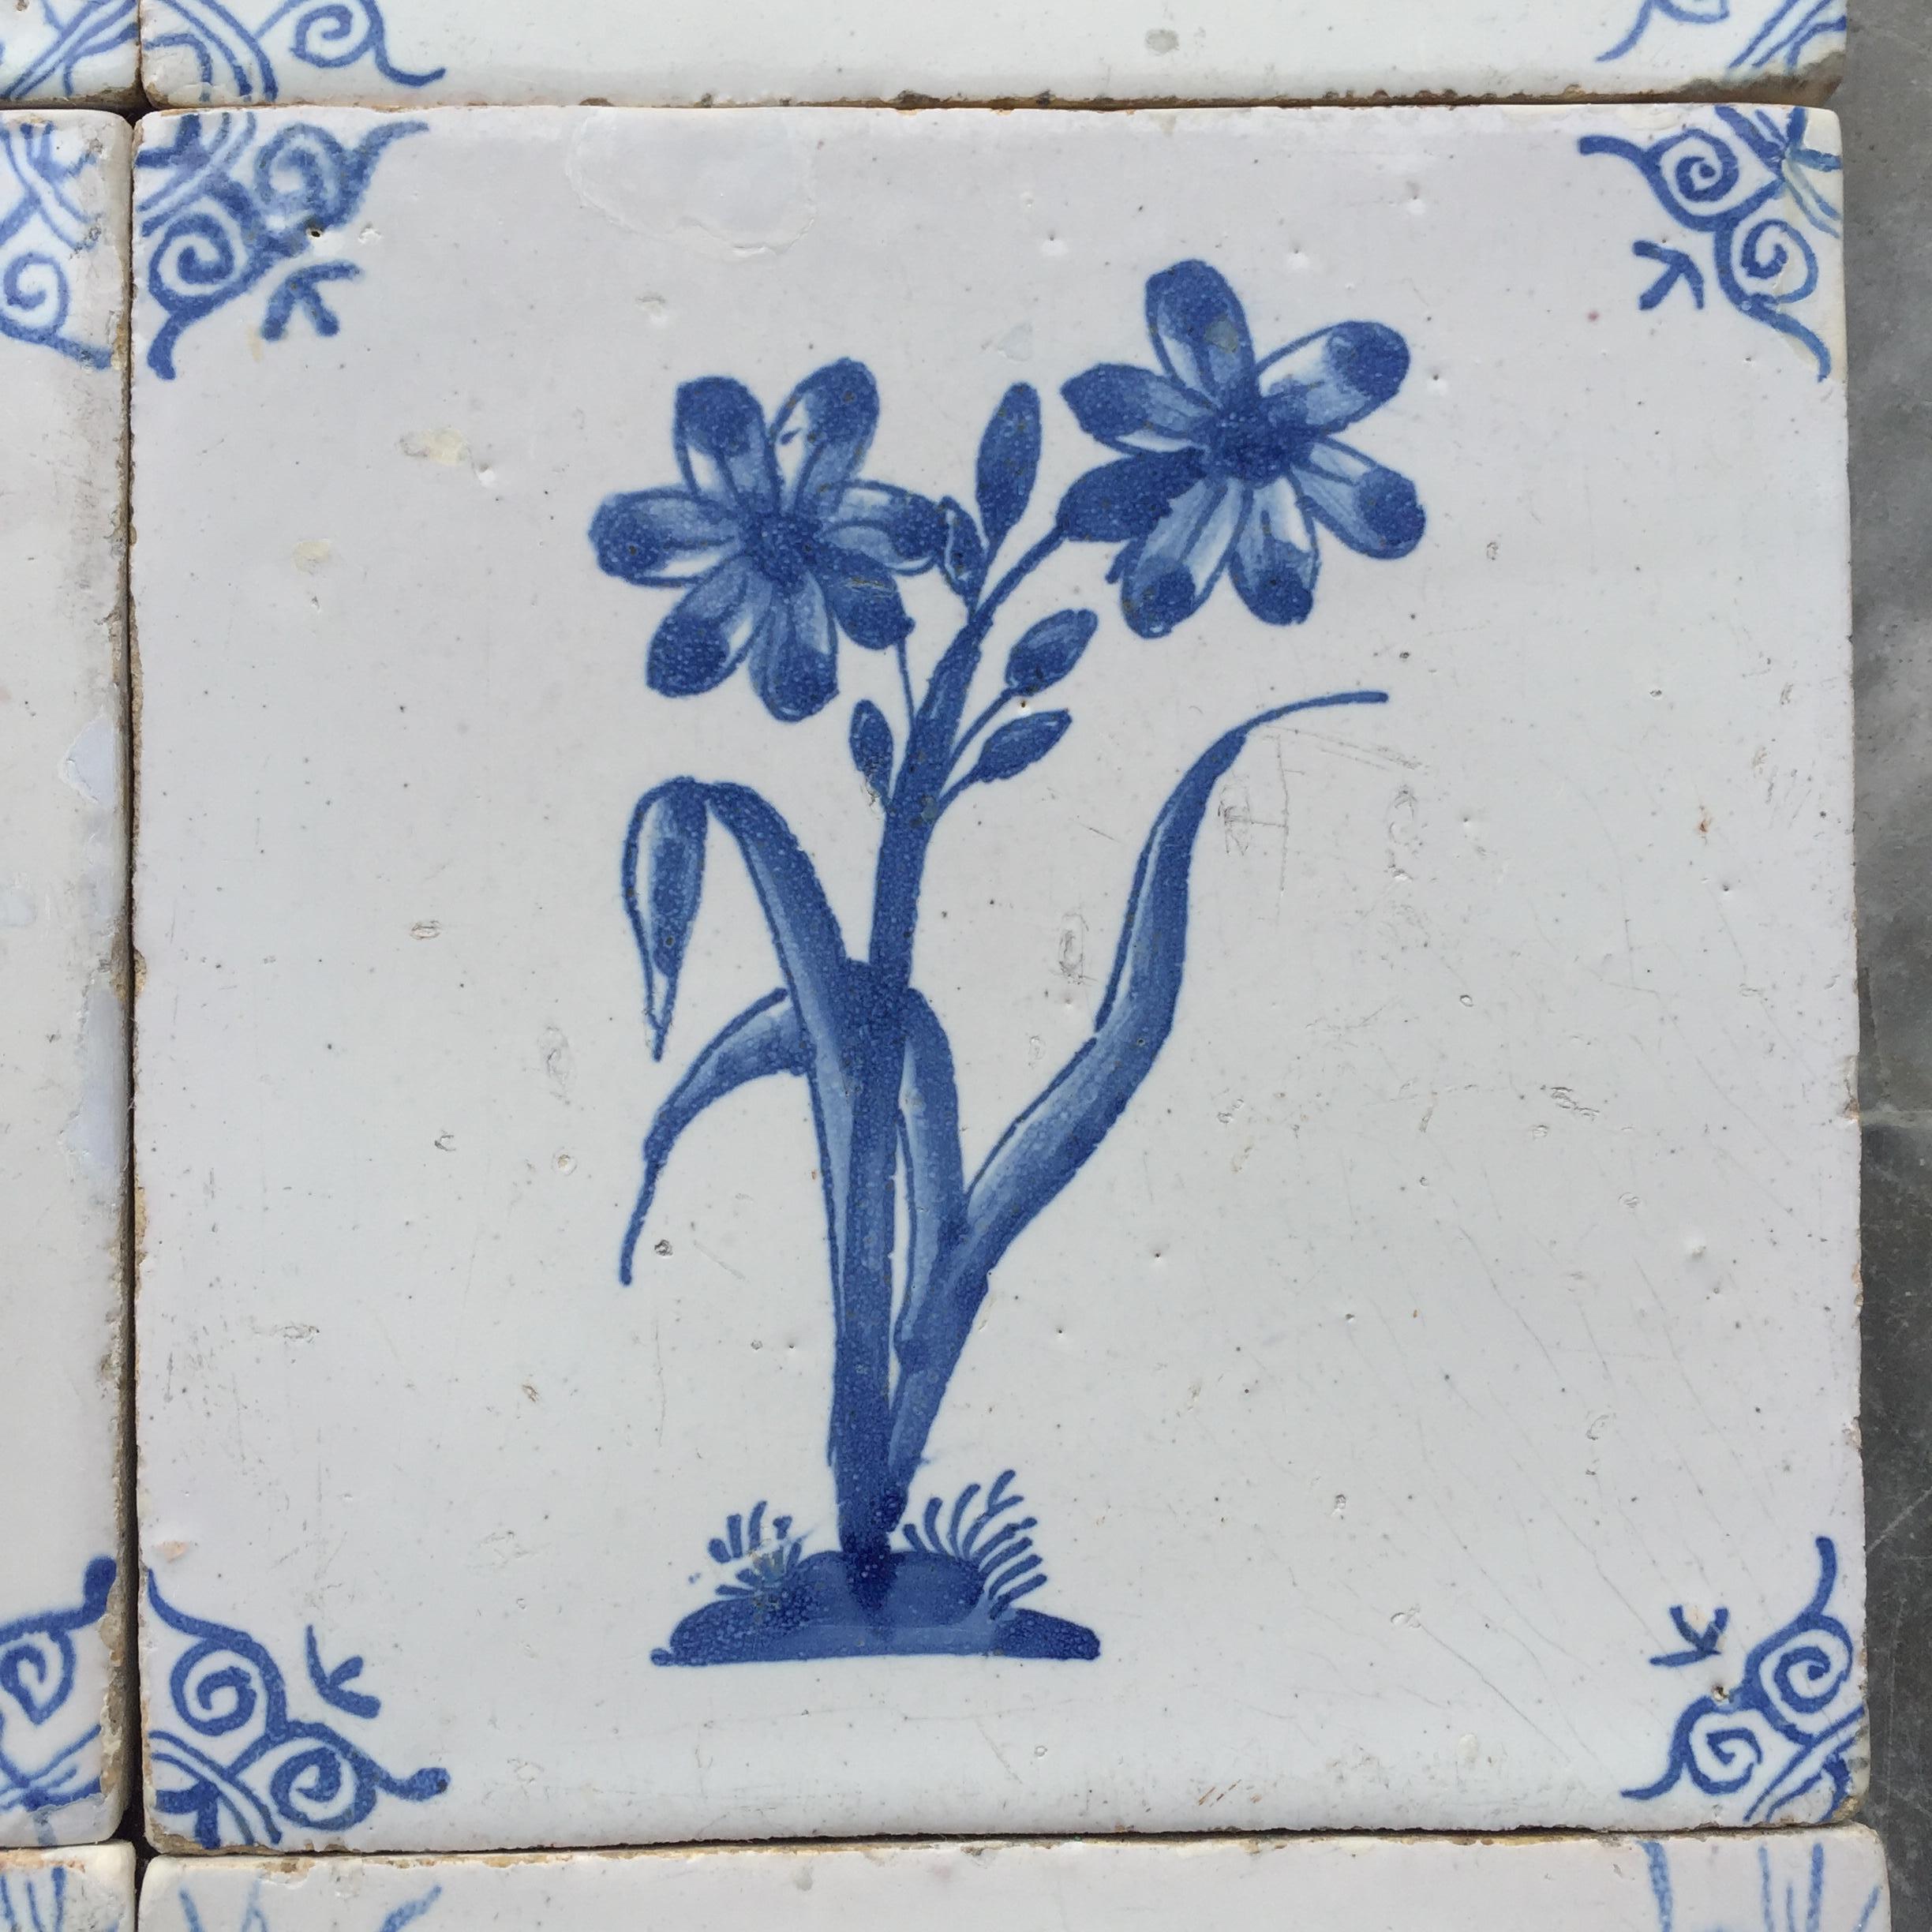 Rare Set of 12 Dutch Delft Tiles with Flowers and Insects, 17th Century 5